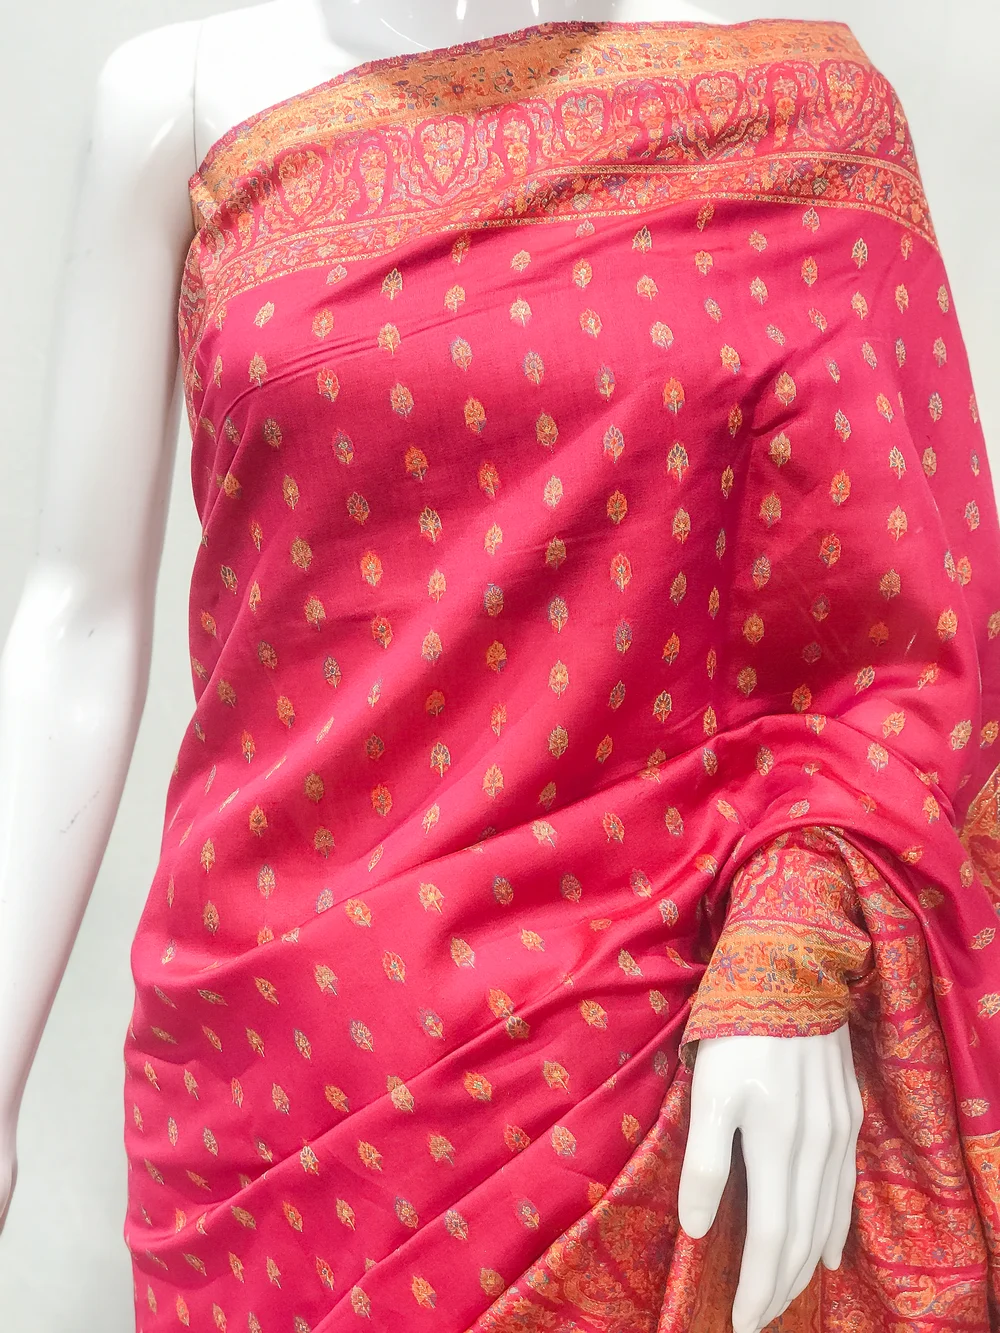 Pink Modal Silk Kani Saree with Floral and Paisley Design Front